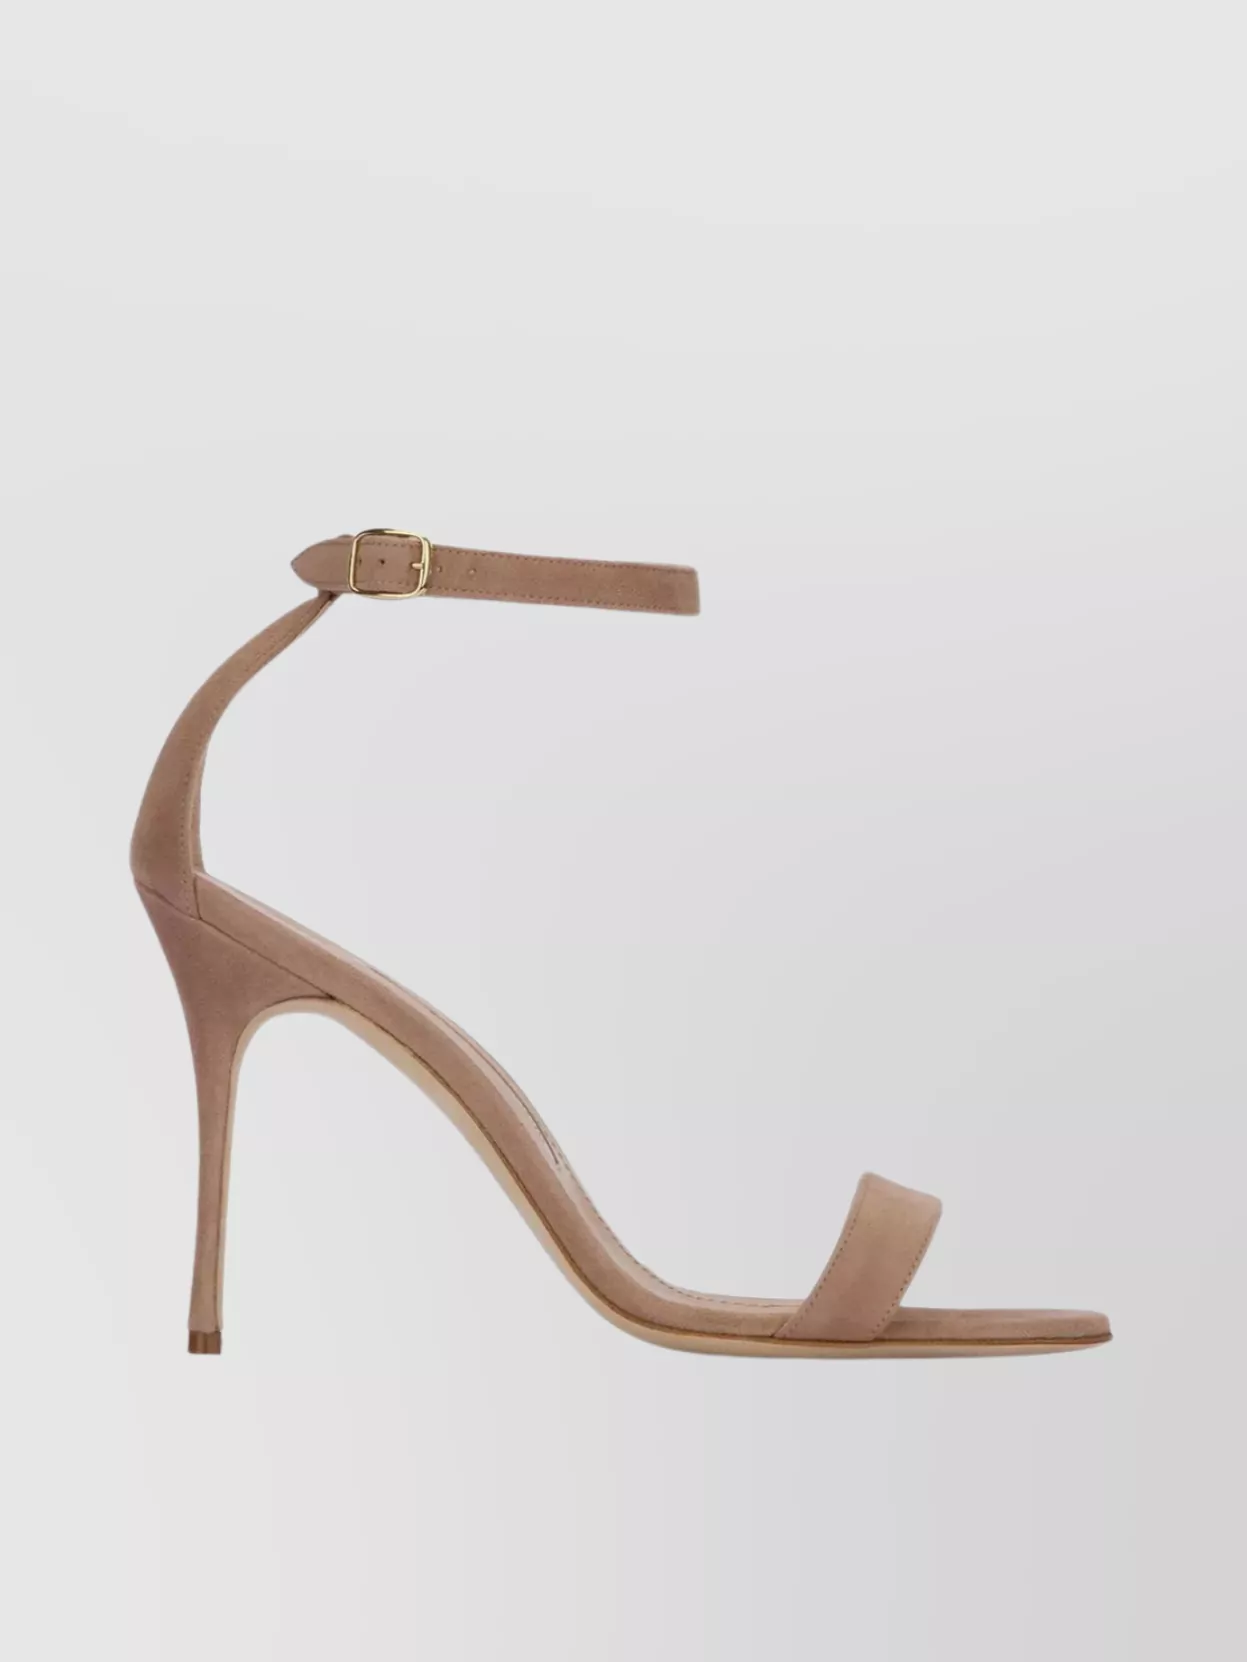 Shop Manolo Blahnik Chaos Suede Sandals With Open Toe And Stiletto Heel